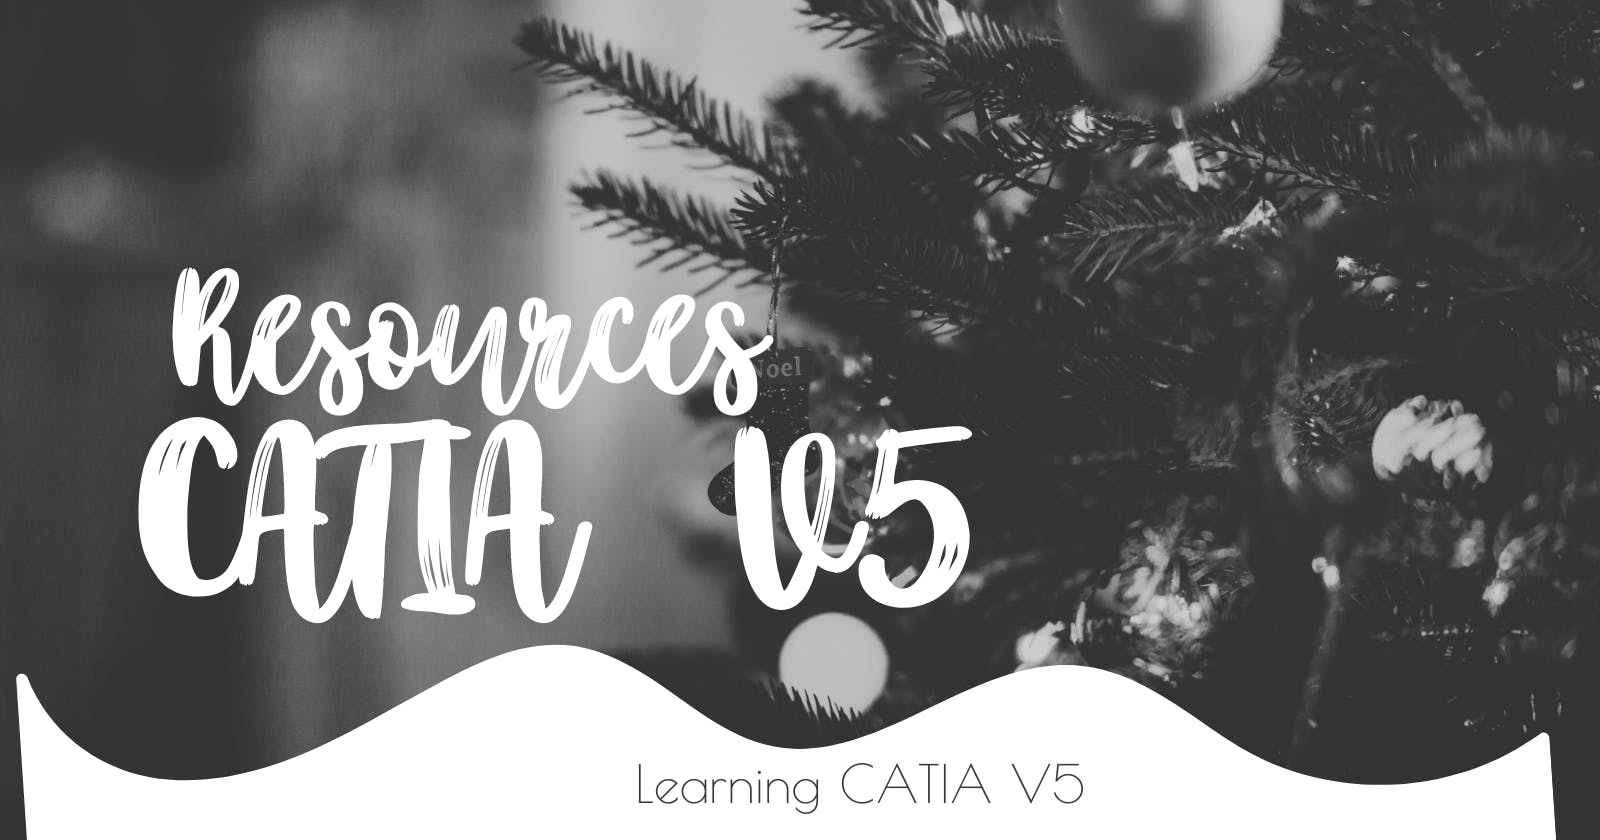 The Best Resources for Learning CATIA V5